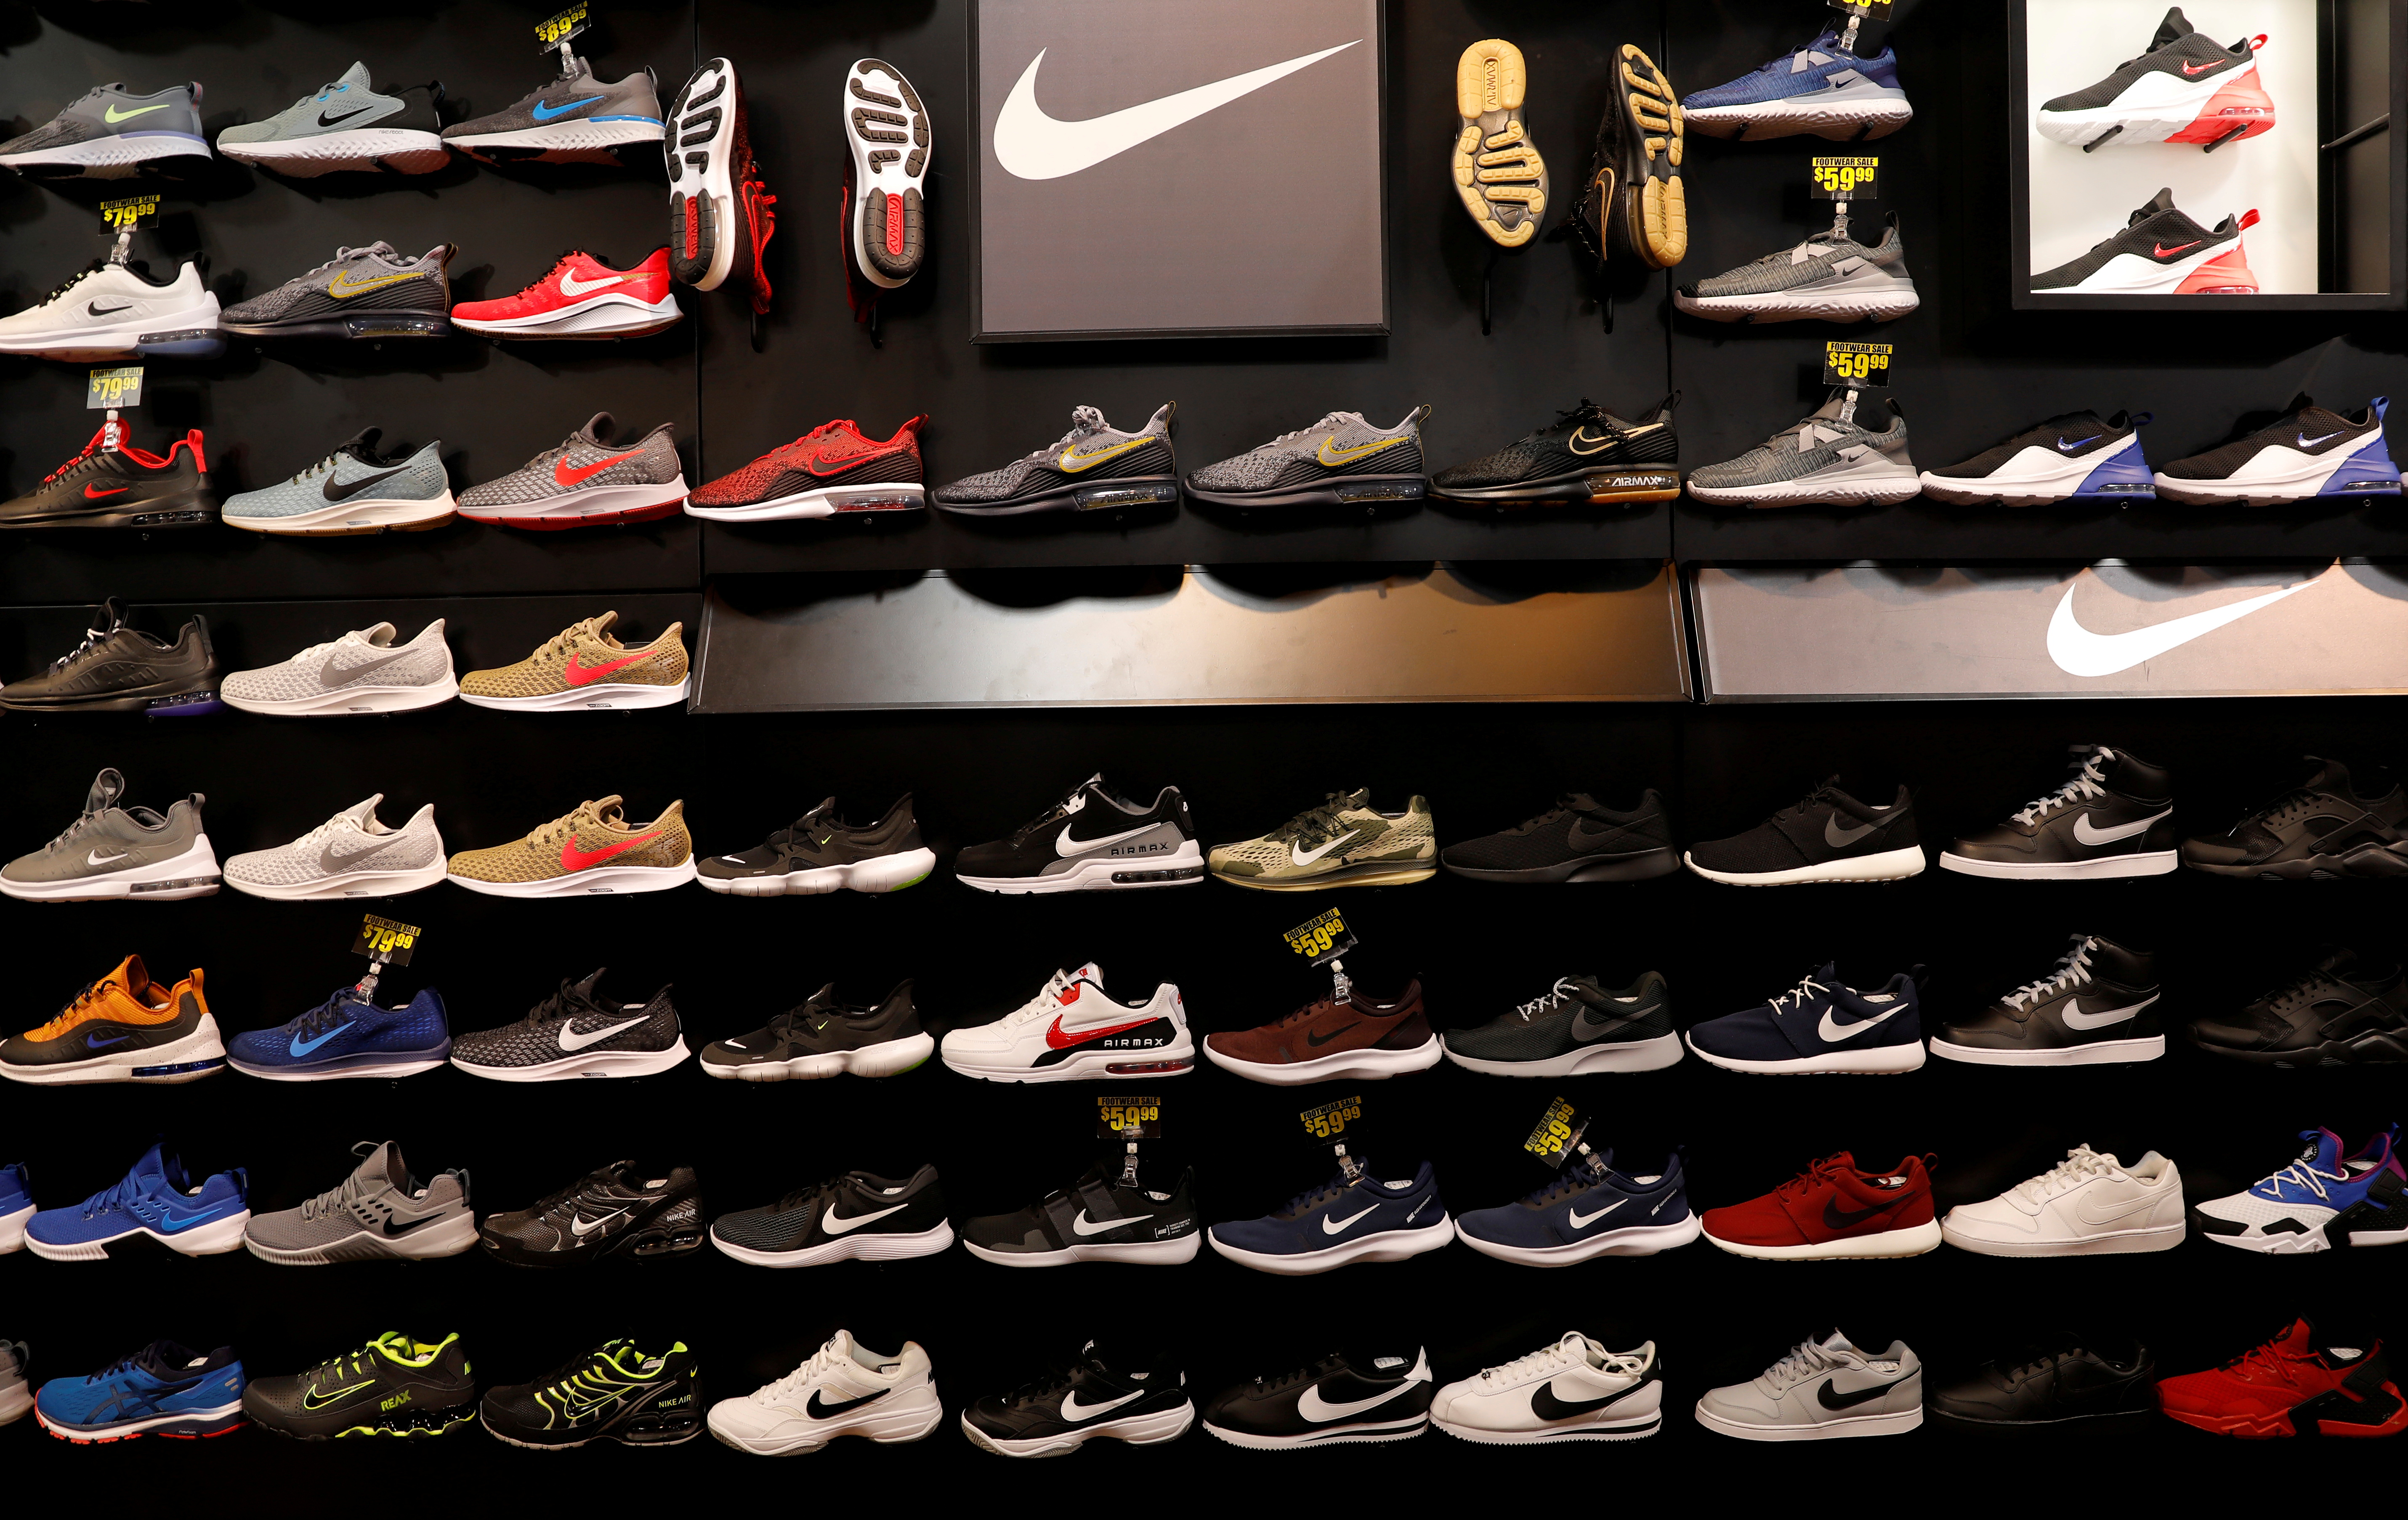 beggar industry Draw a picture Nike's Vietnam supply hurdles in focus ahead of quarterly results | Reuters